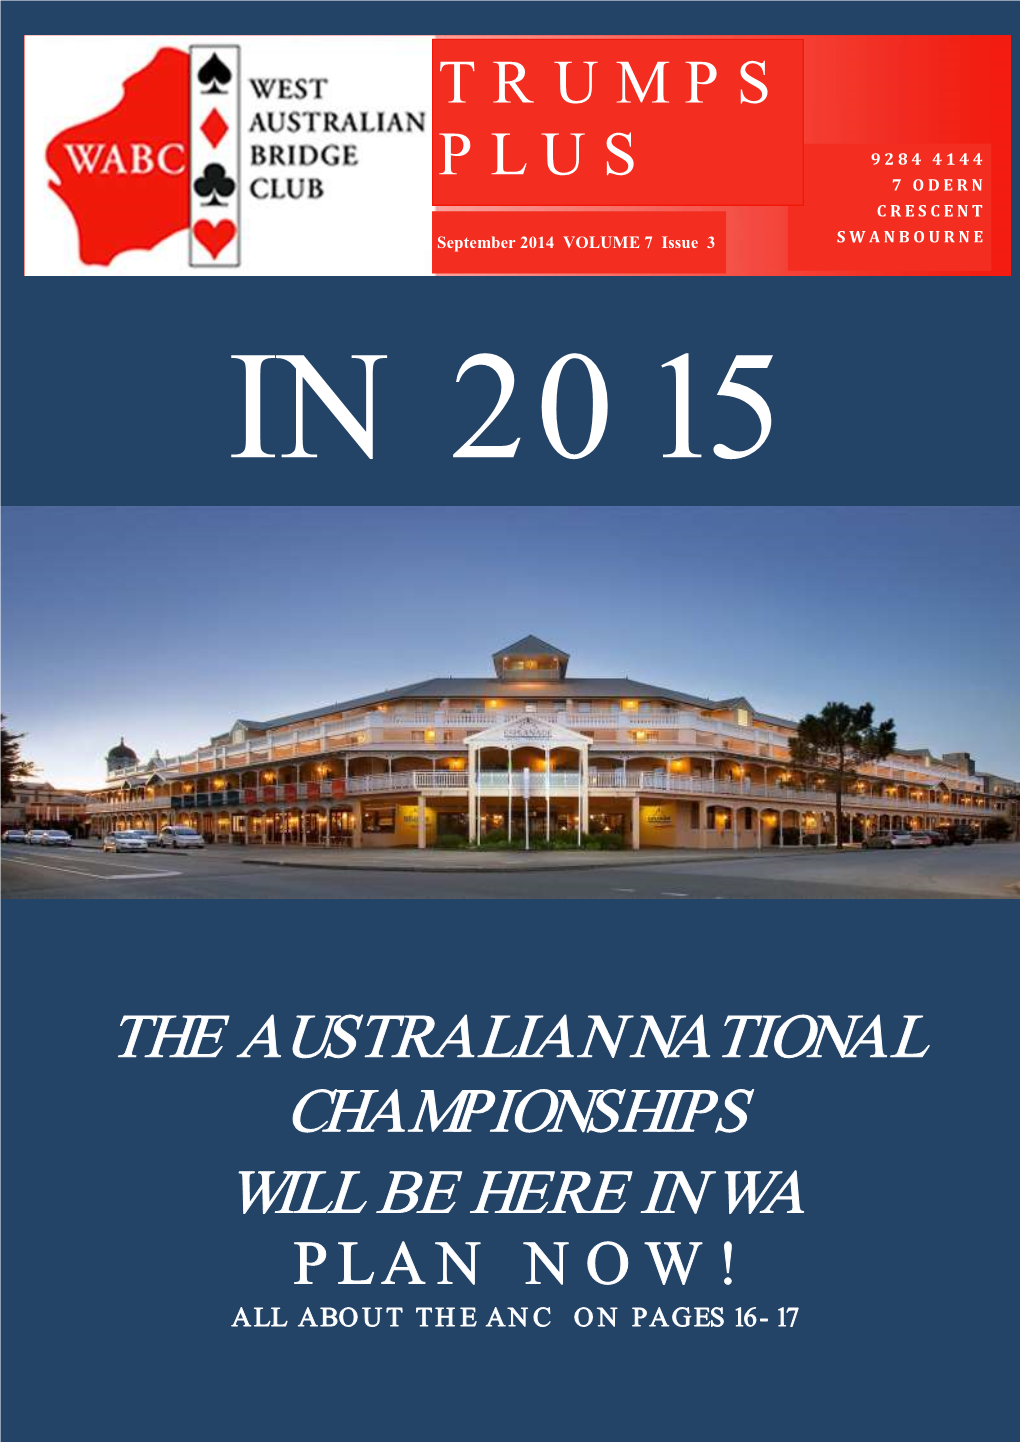 The Australian National Championships Will Be Here in Wa Plan Now! All About the Anc on Pages 16-17